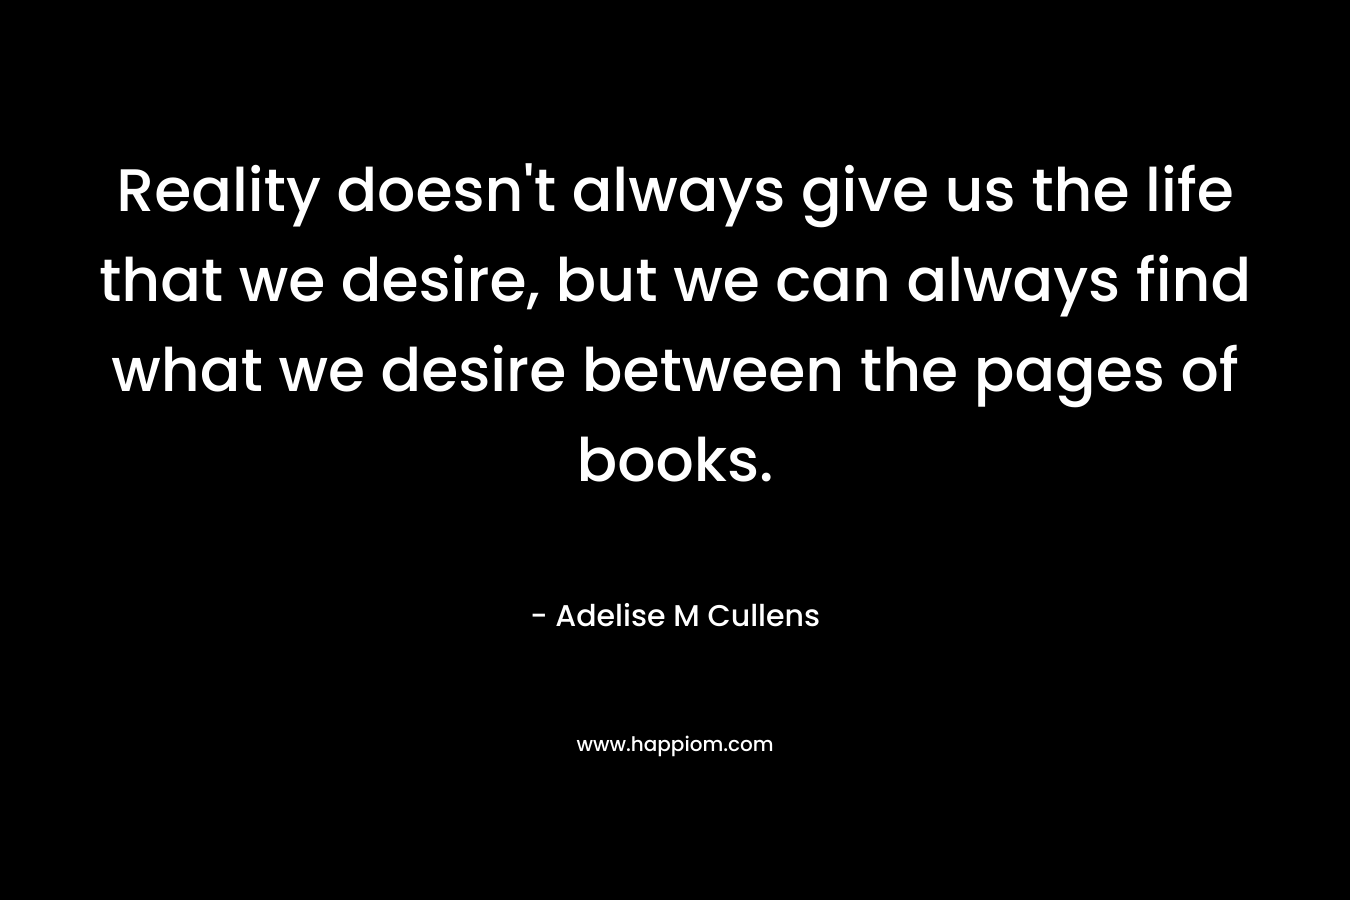 Reality doesn't always give us the life that we desire, but we can always find what we desire between the pages of books.